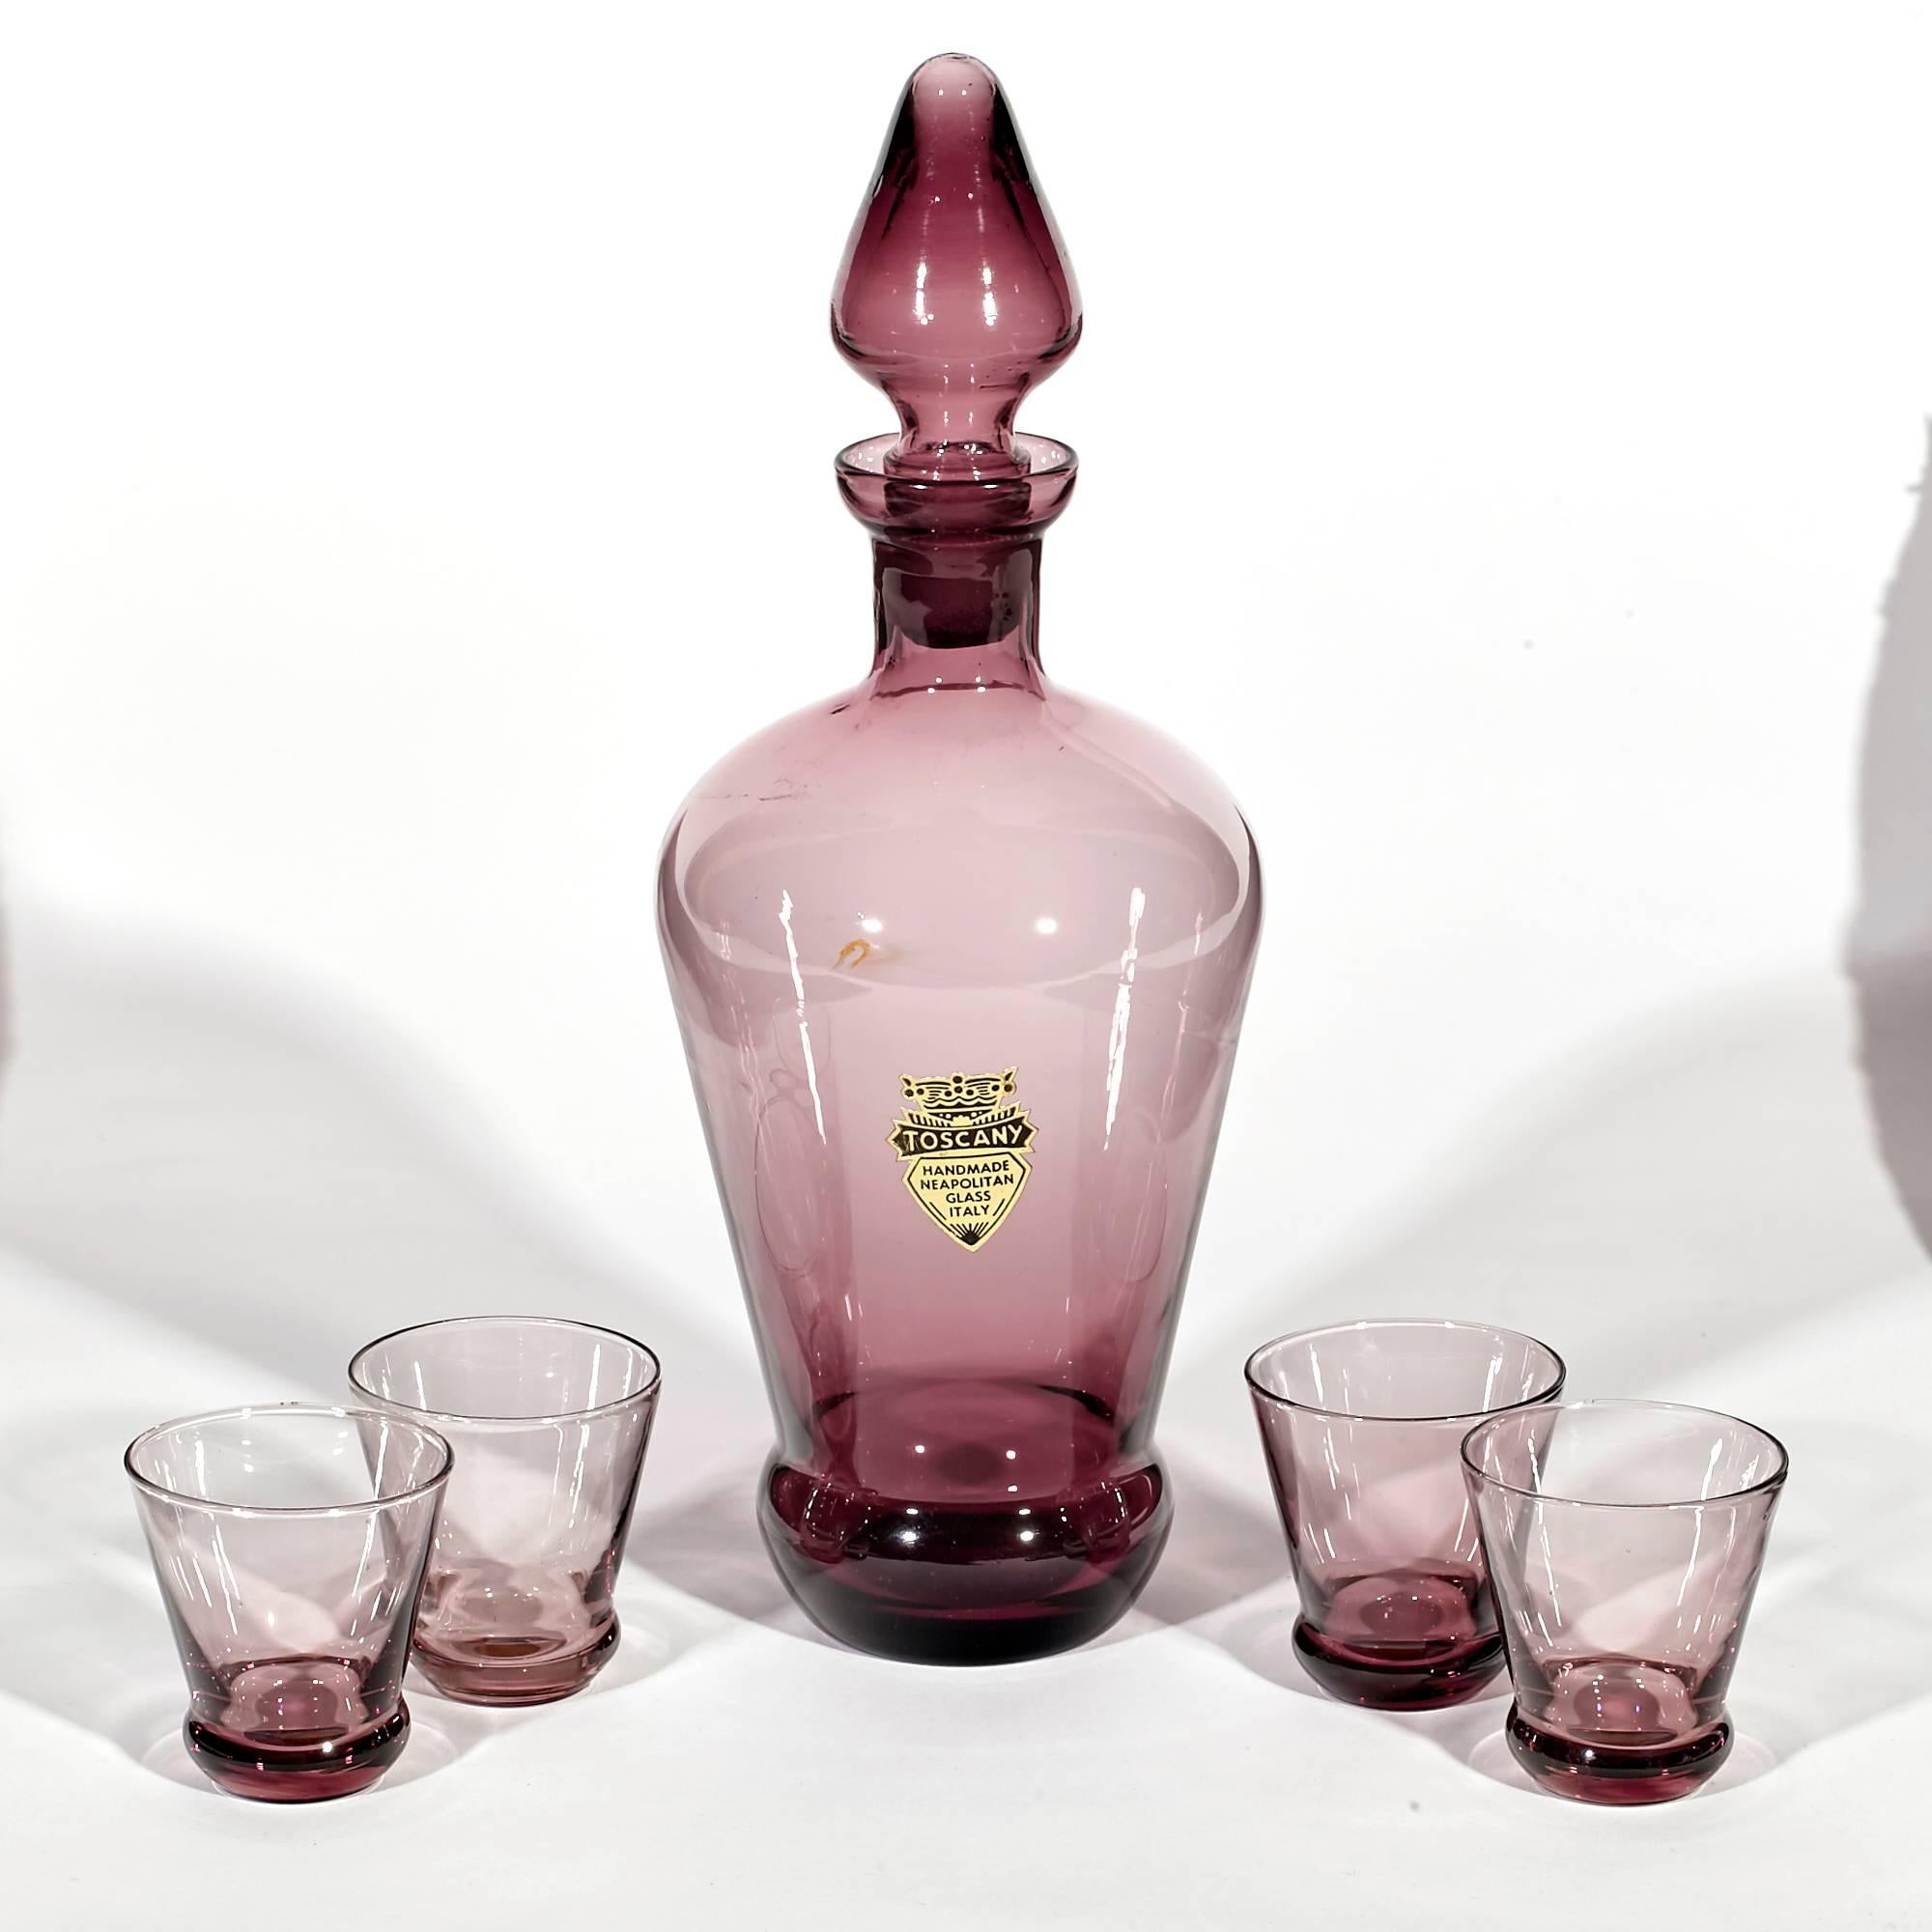 Vintage 1960s five-piece Italian amethyst glass decanter set from Toscany, Italy. Shot glasses measure: 2